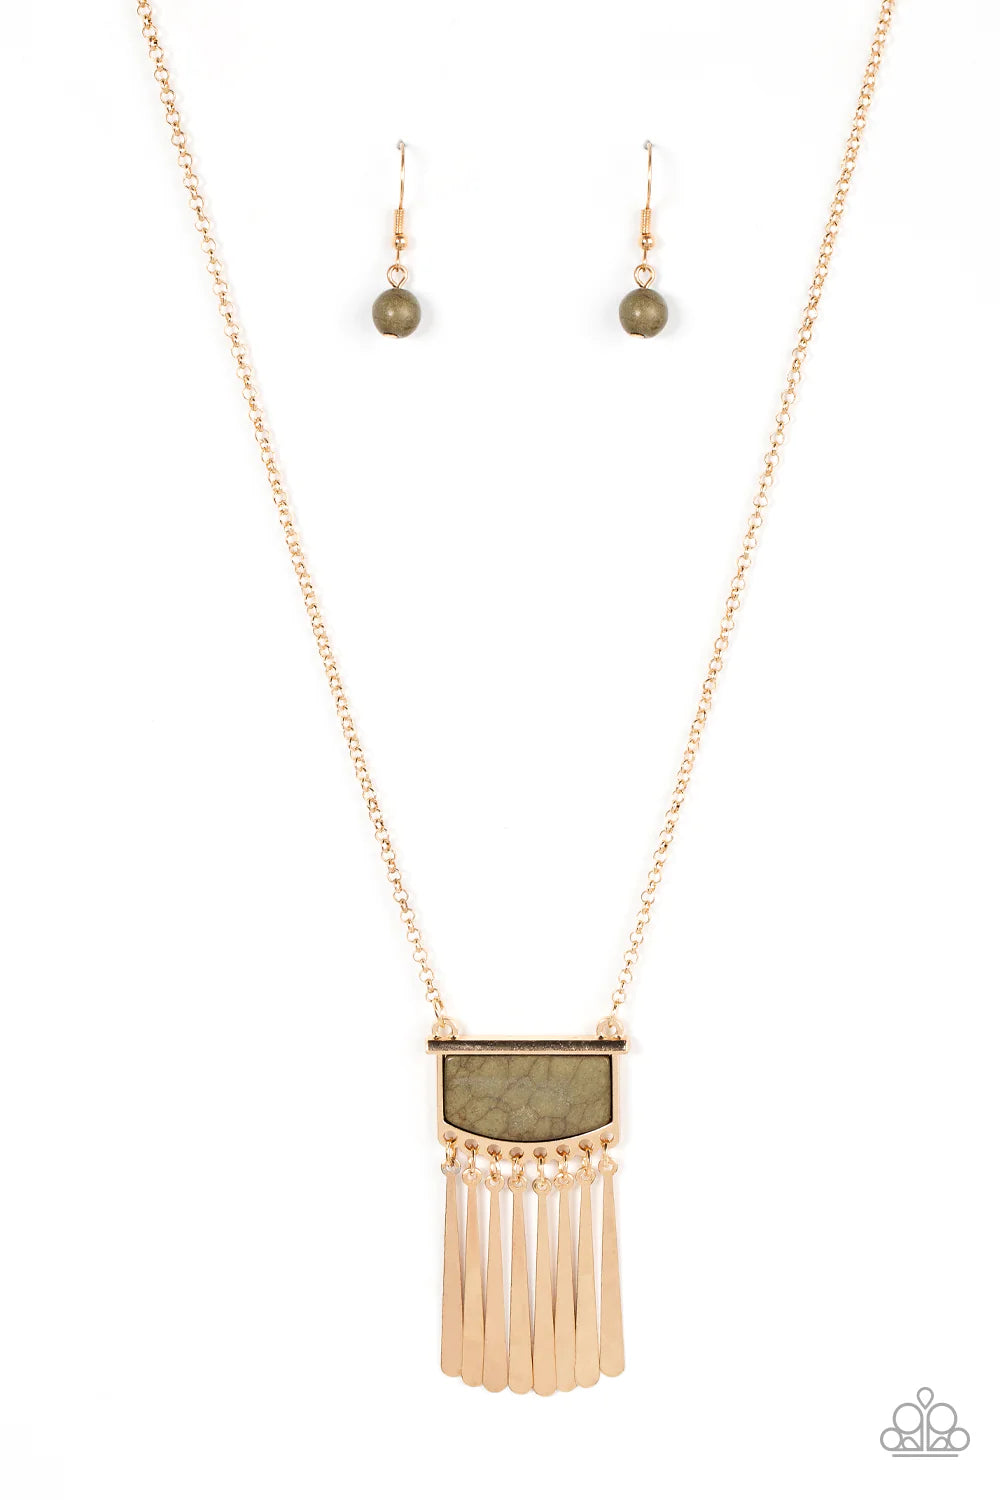 Paparazzi Necklace - Plateau Pioneer - Green